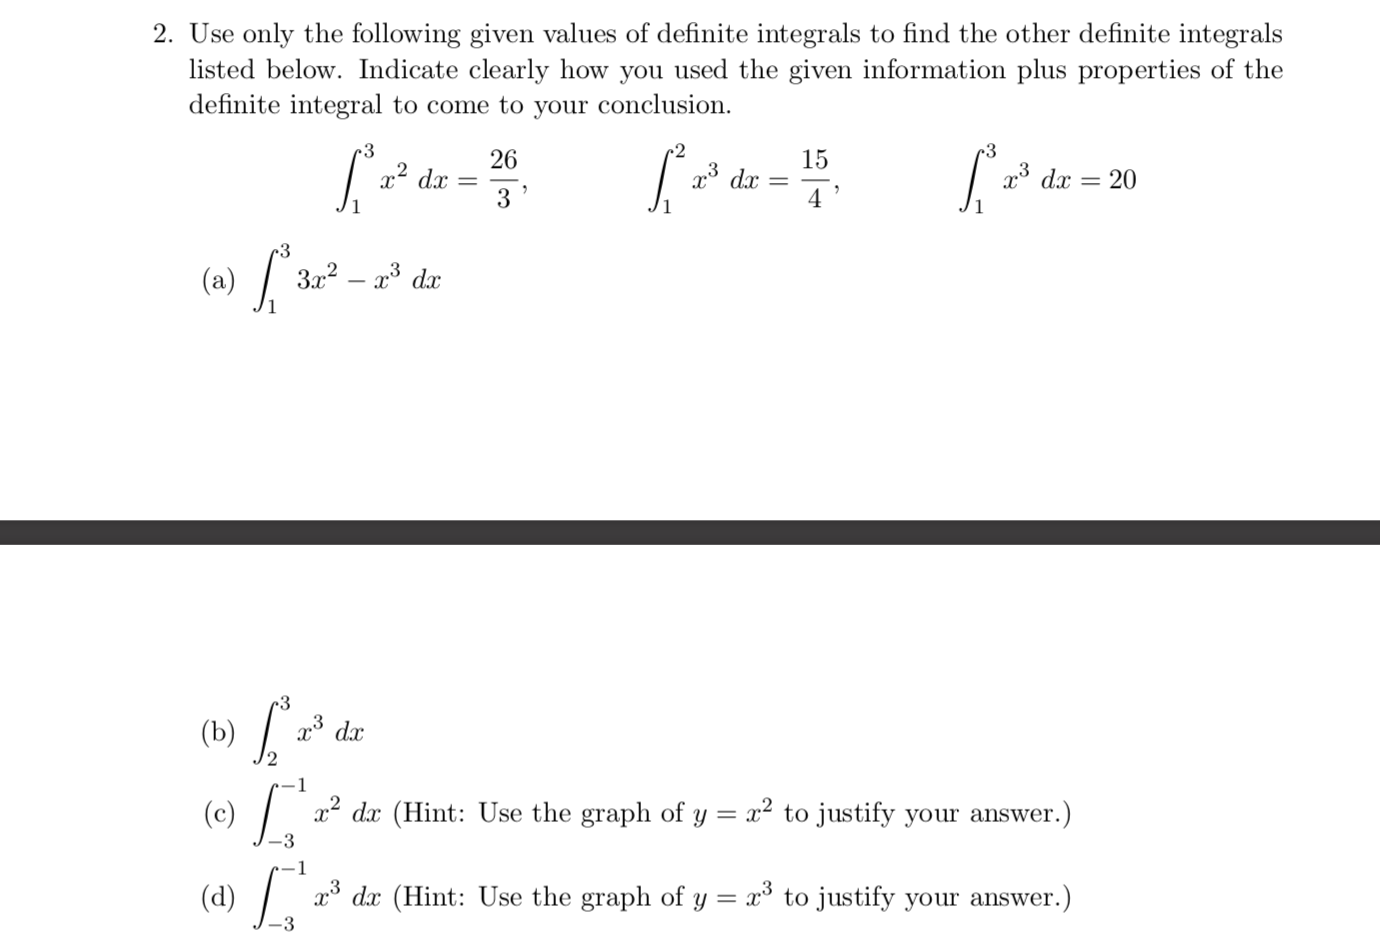 2. Use only the following given values of definite integrals to find the other definite integrals
listed below. Indicate clearly how you used the given information plus properties of the
definite integral to come to your conclusion.
-3
•3
26
x² dx
3
15
23 dx
x* dx
20
4 '
•3
(a) / 3=² – a*.
3x?
dx
(Ь)
x° dx
(c)
x2 dx (Hint: Use the graph of y = x² to justify your answer.)
-3
(d)
x* dx (Hint: Use the graph of y = x° to justify your answer.)
